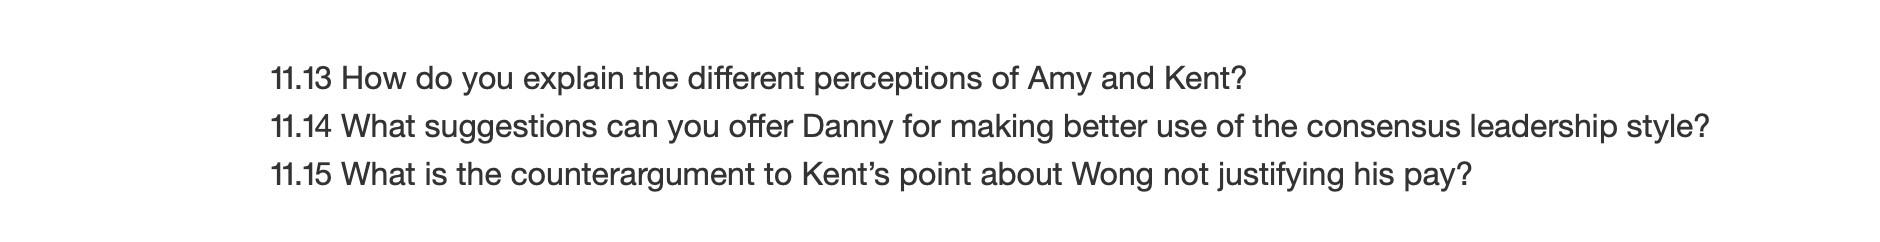 11.13 How do you explain the different perceptions of Amy and Kent? 11.14 What suggestions can you offer